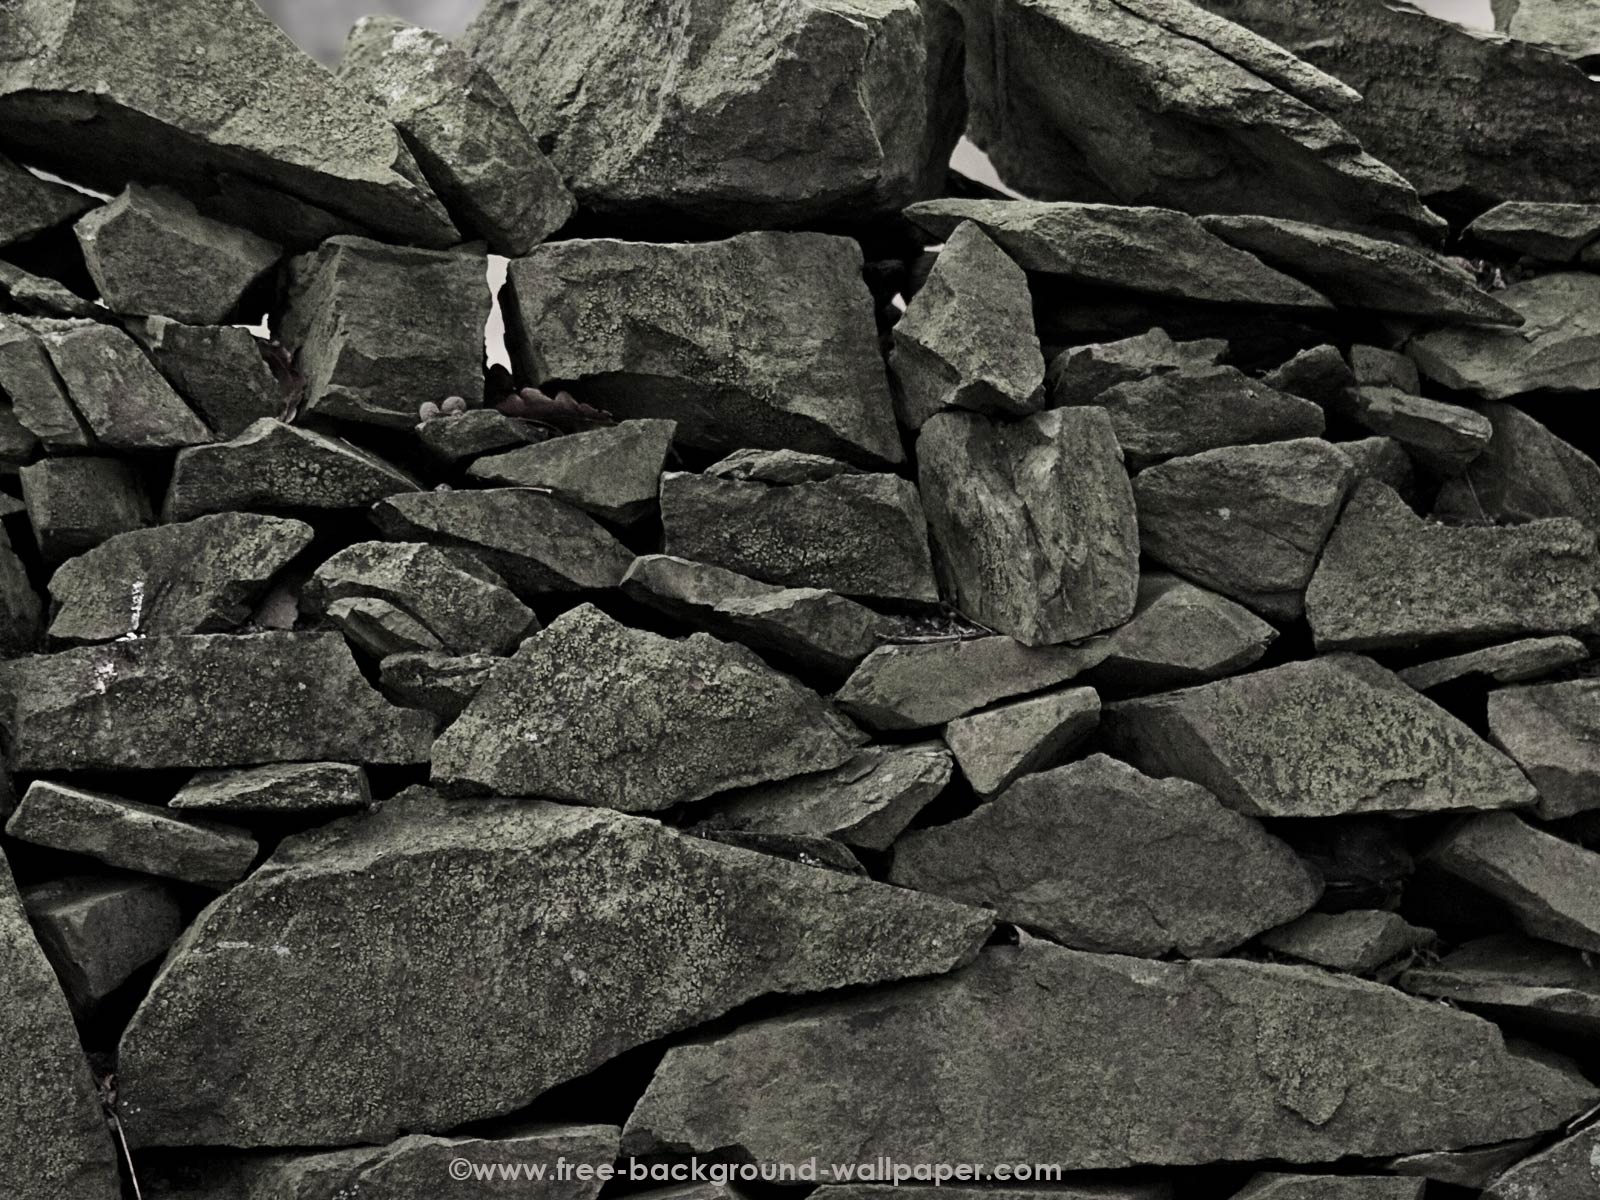  background wallpapercomimagelarge1600x120091Grey Dry Stone Wall